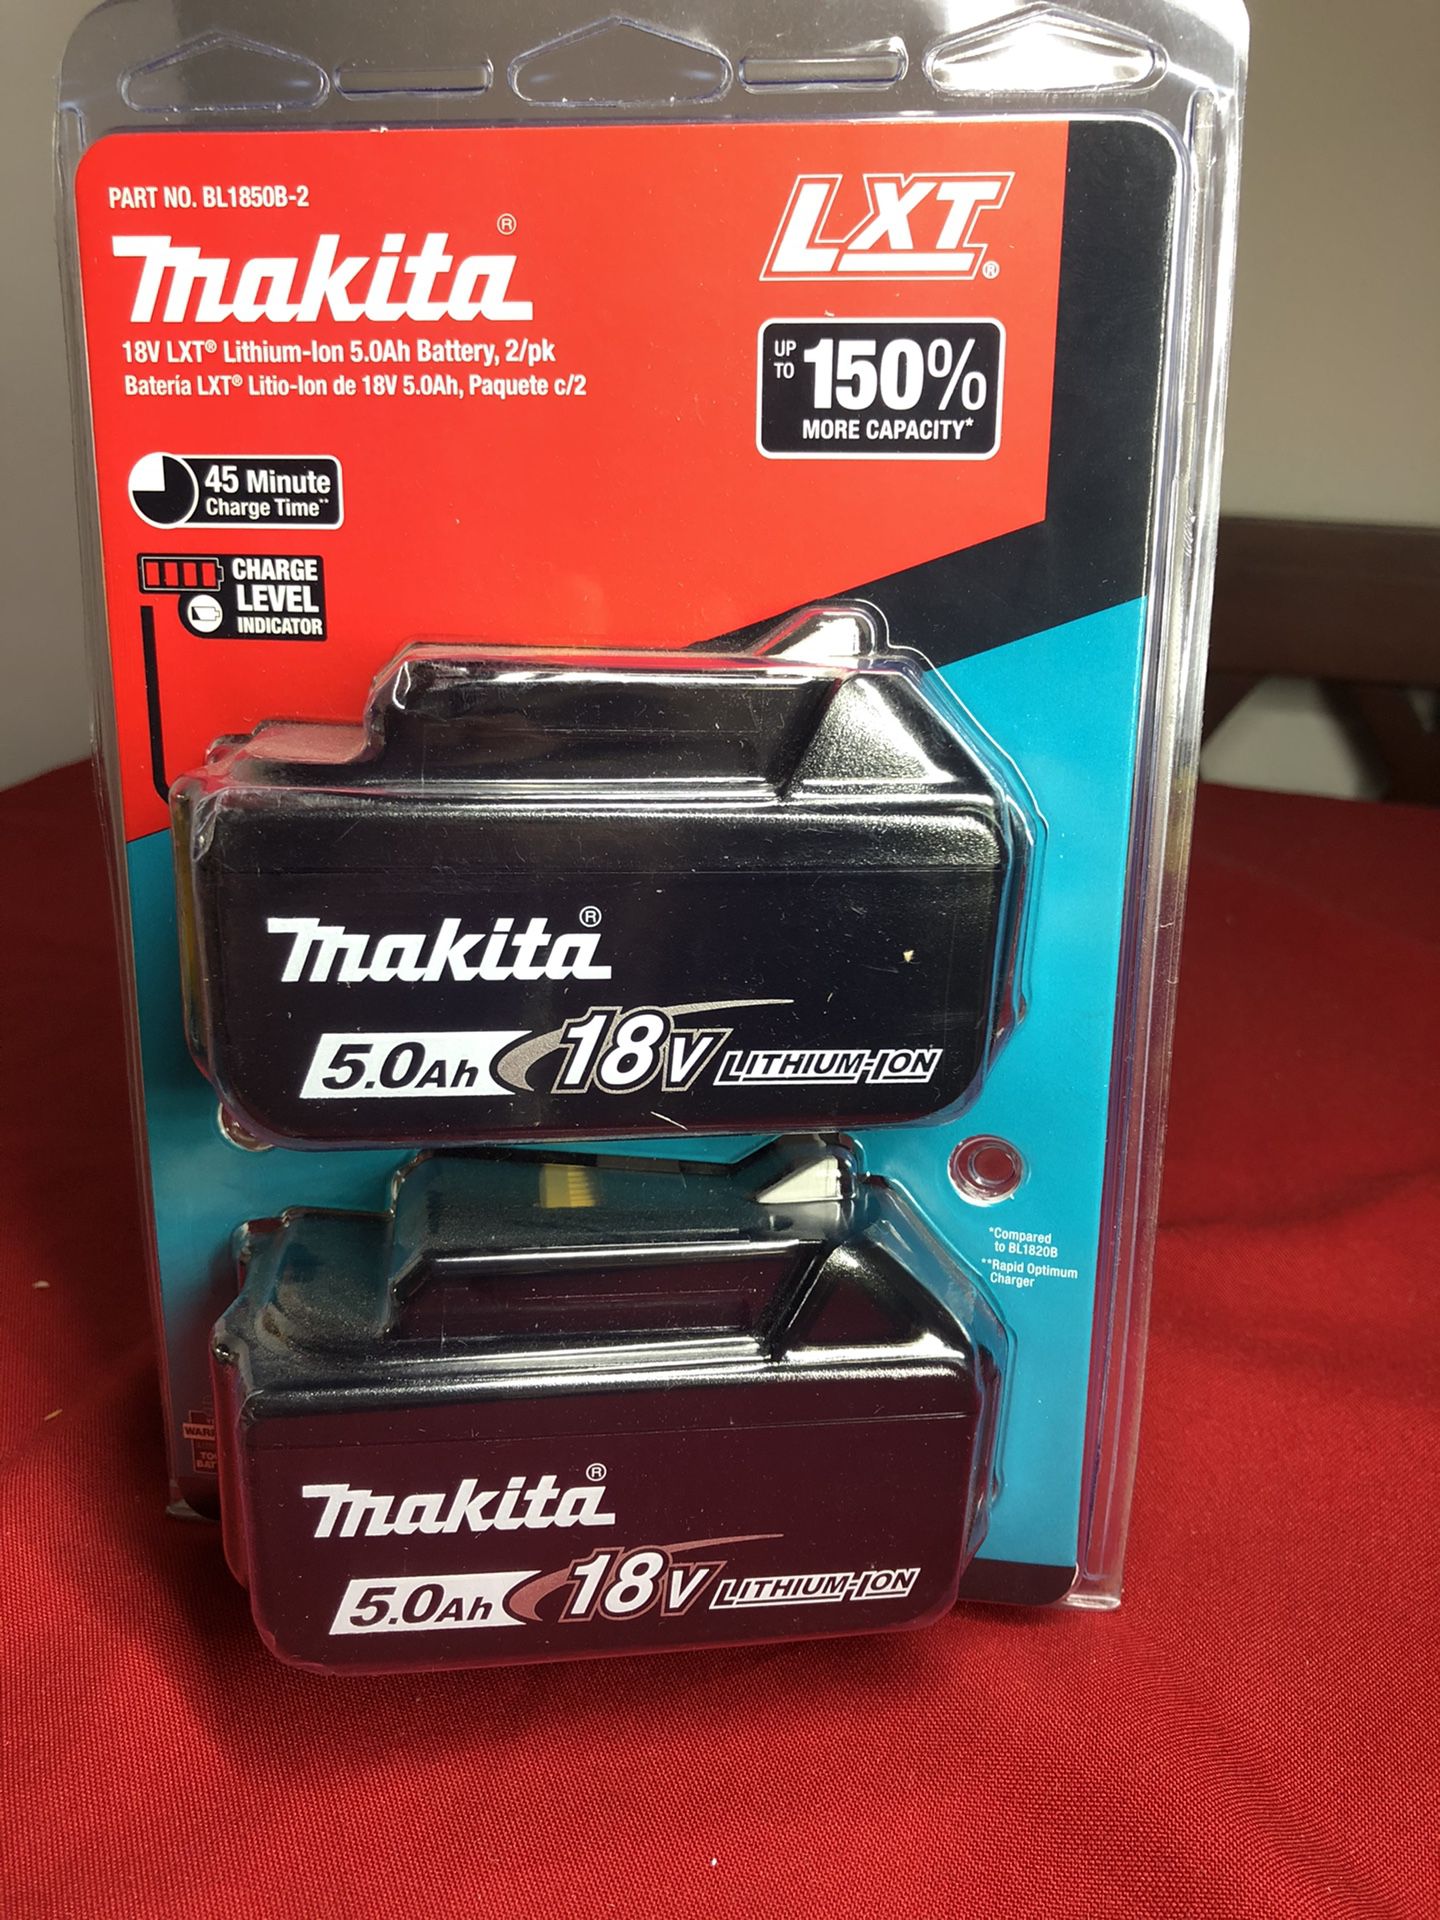 Makita 18-Volt LXT Lithium-Ion High Capacity Battery Pack 5.0 Ah with LED Charge Level Indicator (2-Pack